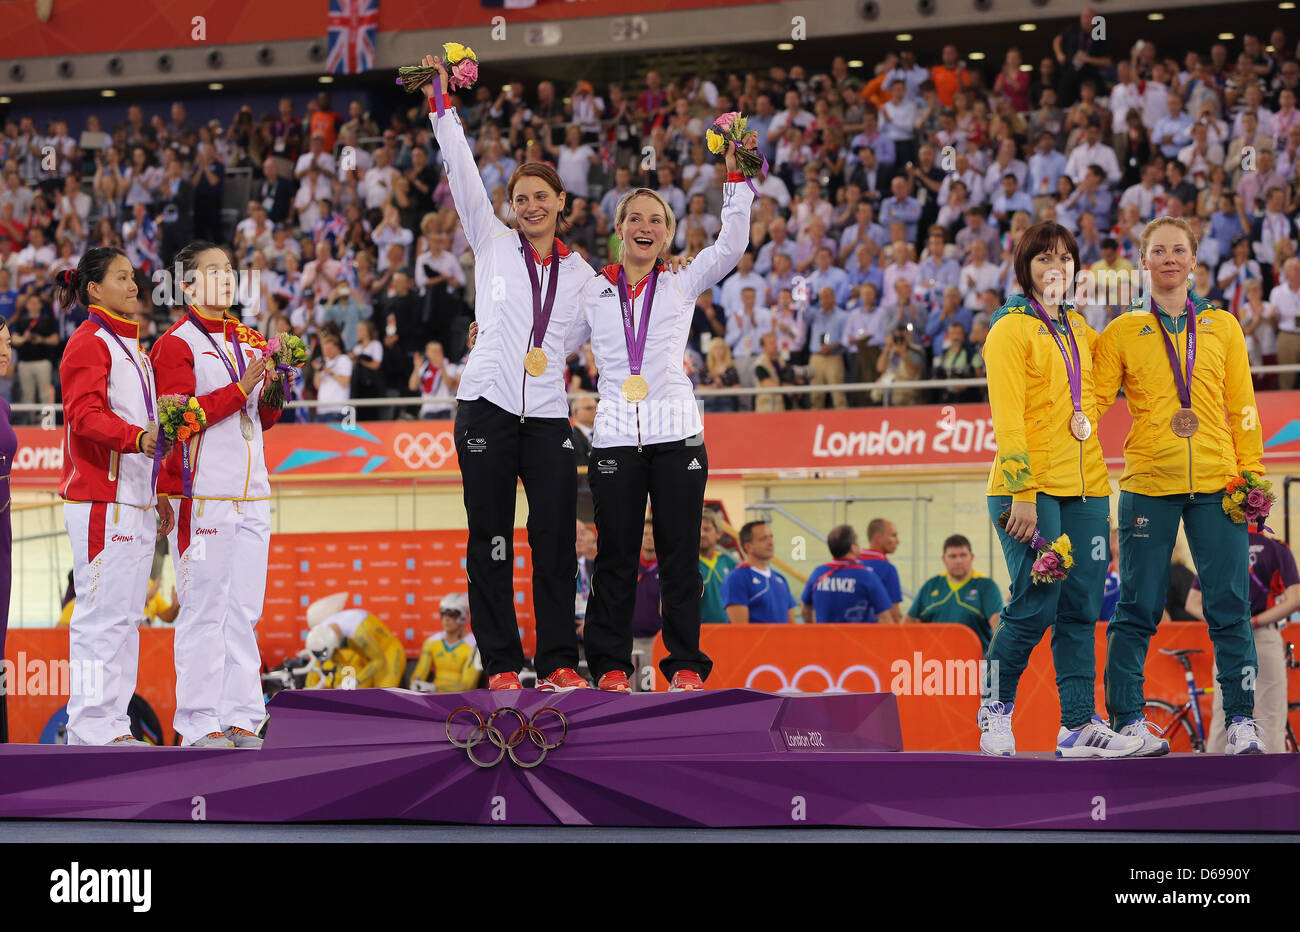 (L-R) Silver medalists Jinjie Gong and Shuang Guo of China, gold medalists Miriam Welte and Kristina Vogel of Germany and bronze medalists Anna Meares and Kaarle Mcculloch of Australia pose with their medals during the medal ceremony for the Women's team Sprint Track Cycling of the London 2012 Olympic Games at Velodrome, London, Great Britain, 02 August 2012. Photo: Christian Chari Stock Photo